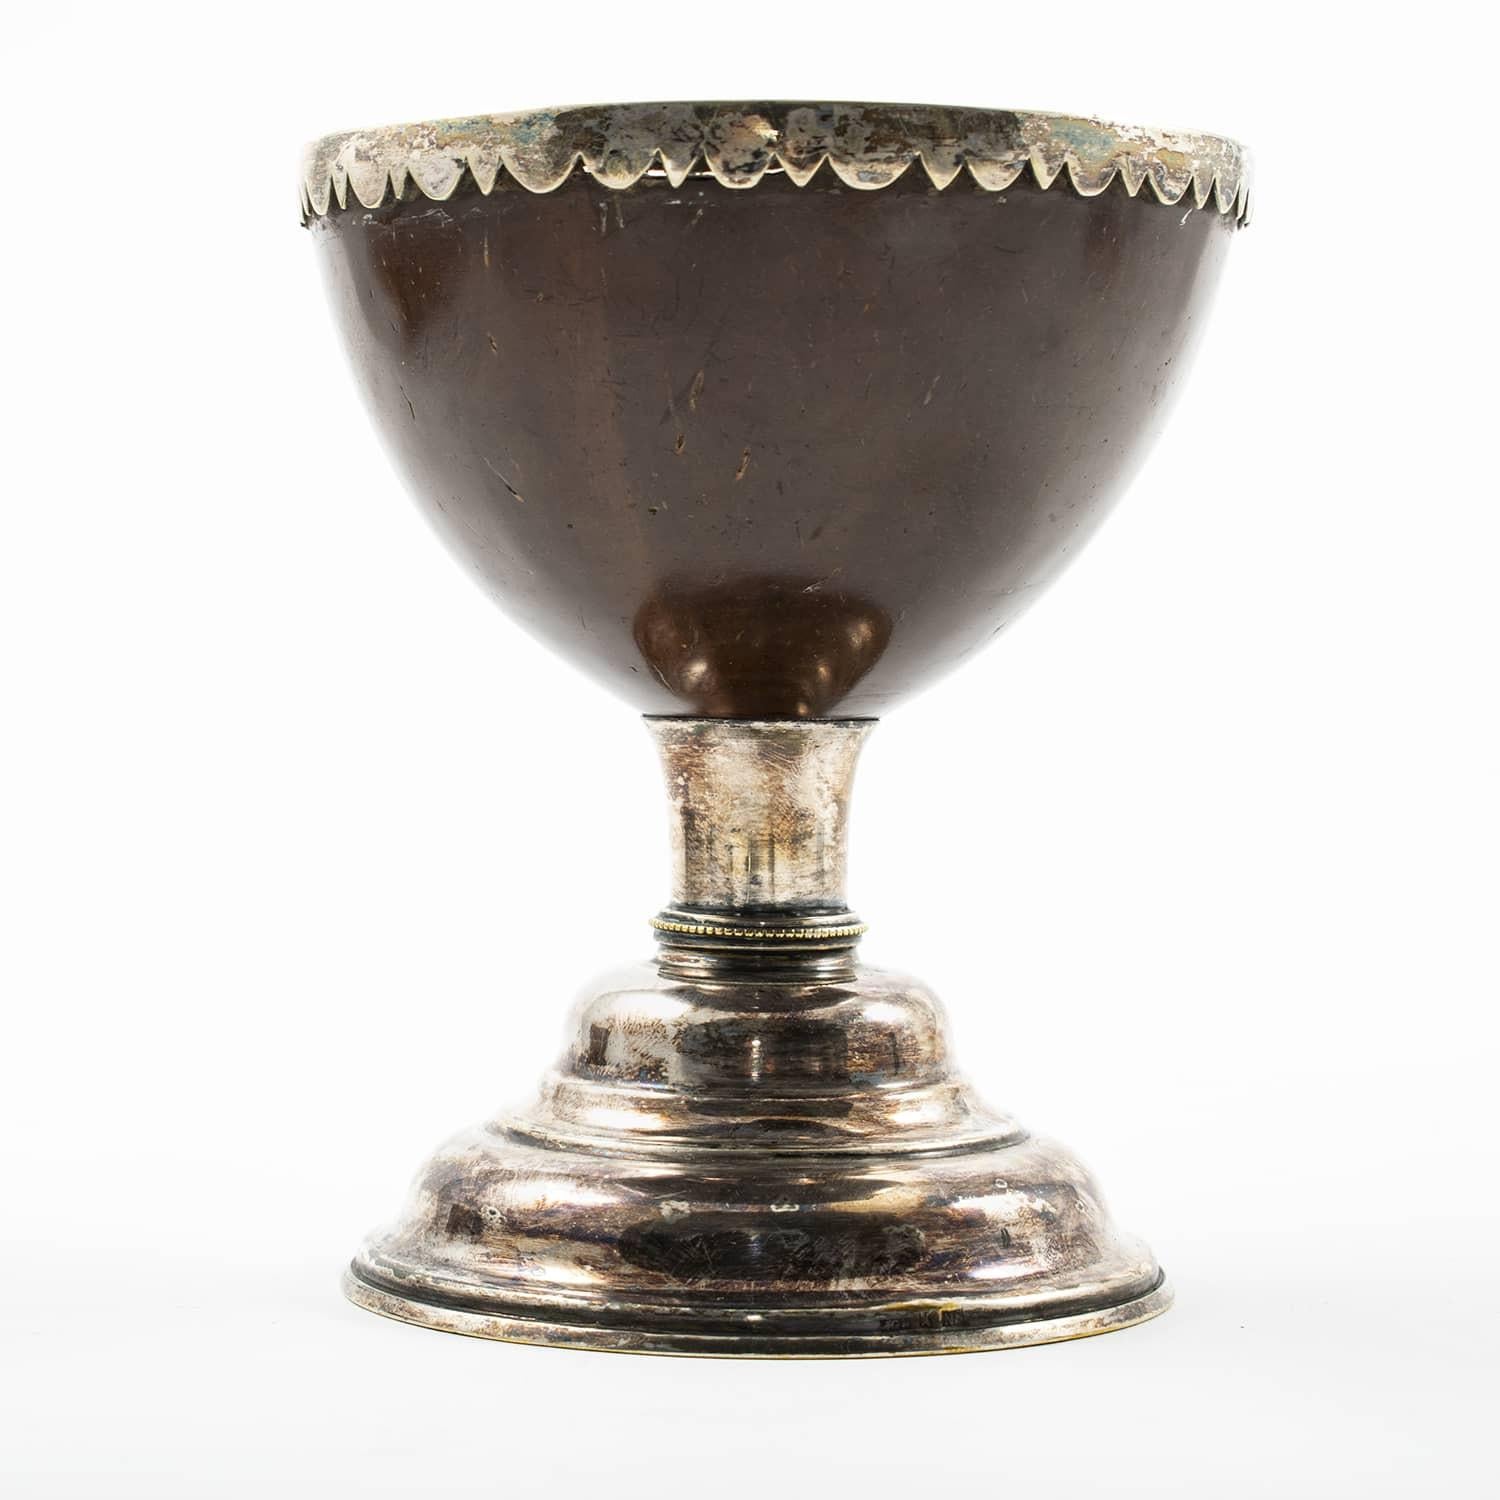 English confectionery Goblet or cup featuring the shell of a coconut mounted into silver.
In original untouched and superb condition.

If desired, we offer to polish the silver parts.